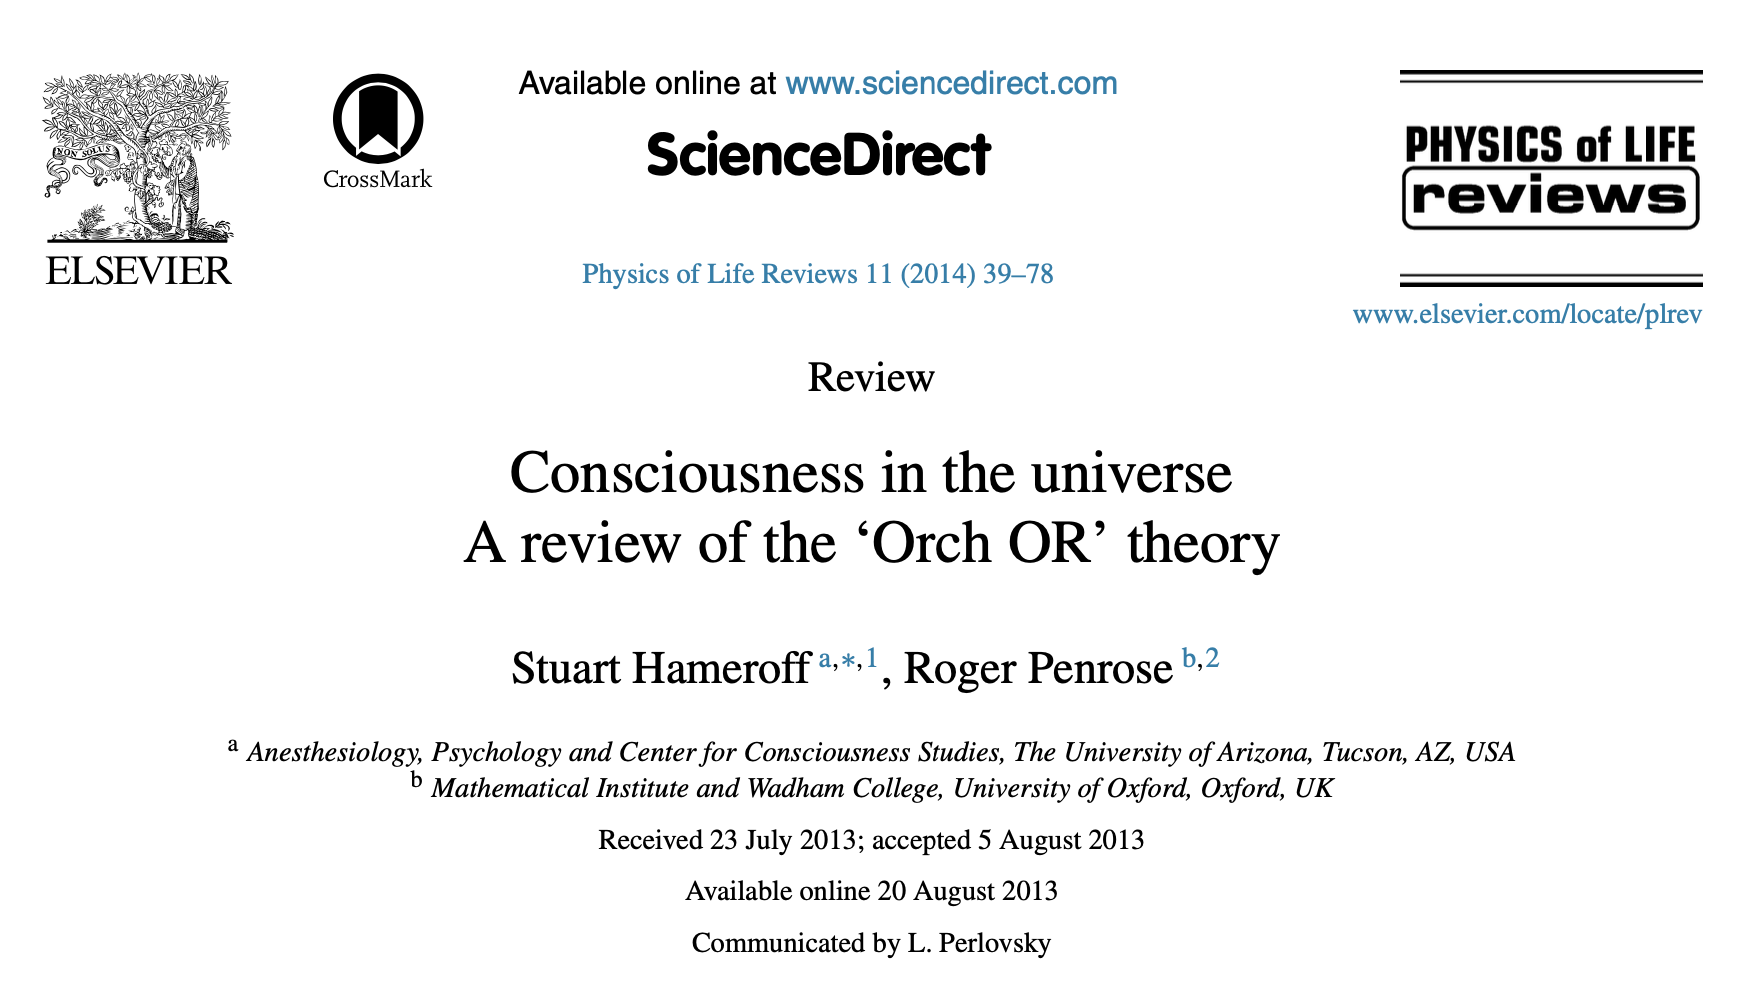 Consciousness in the universe. A review of the Orch OR theory